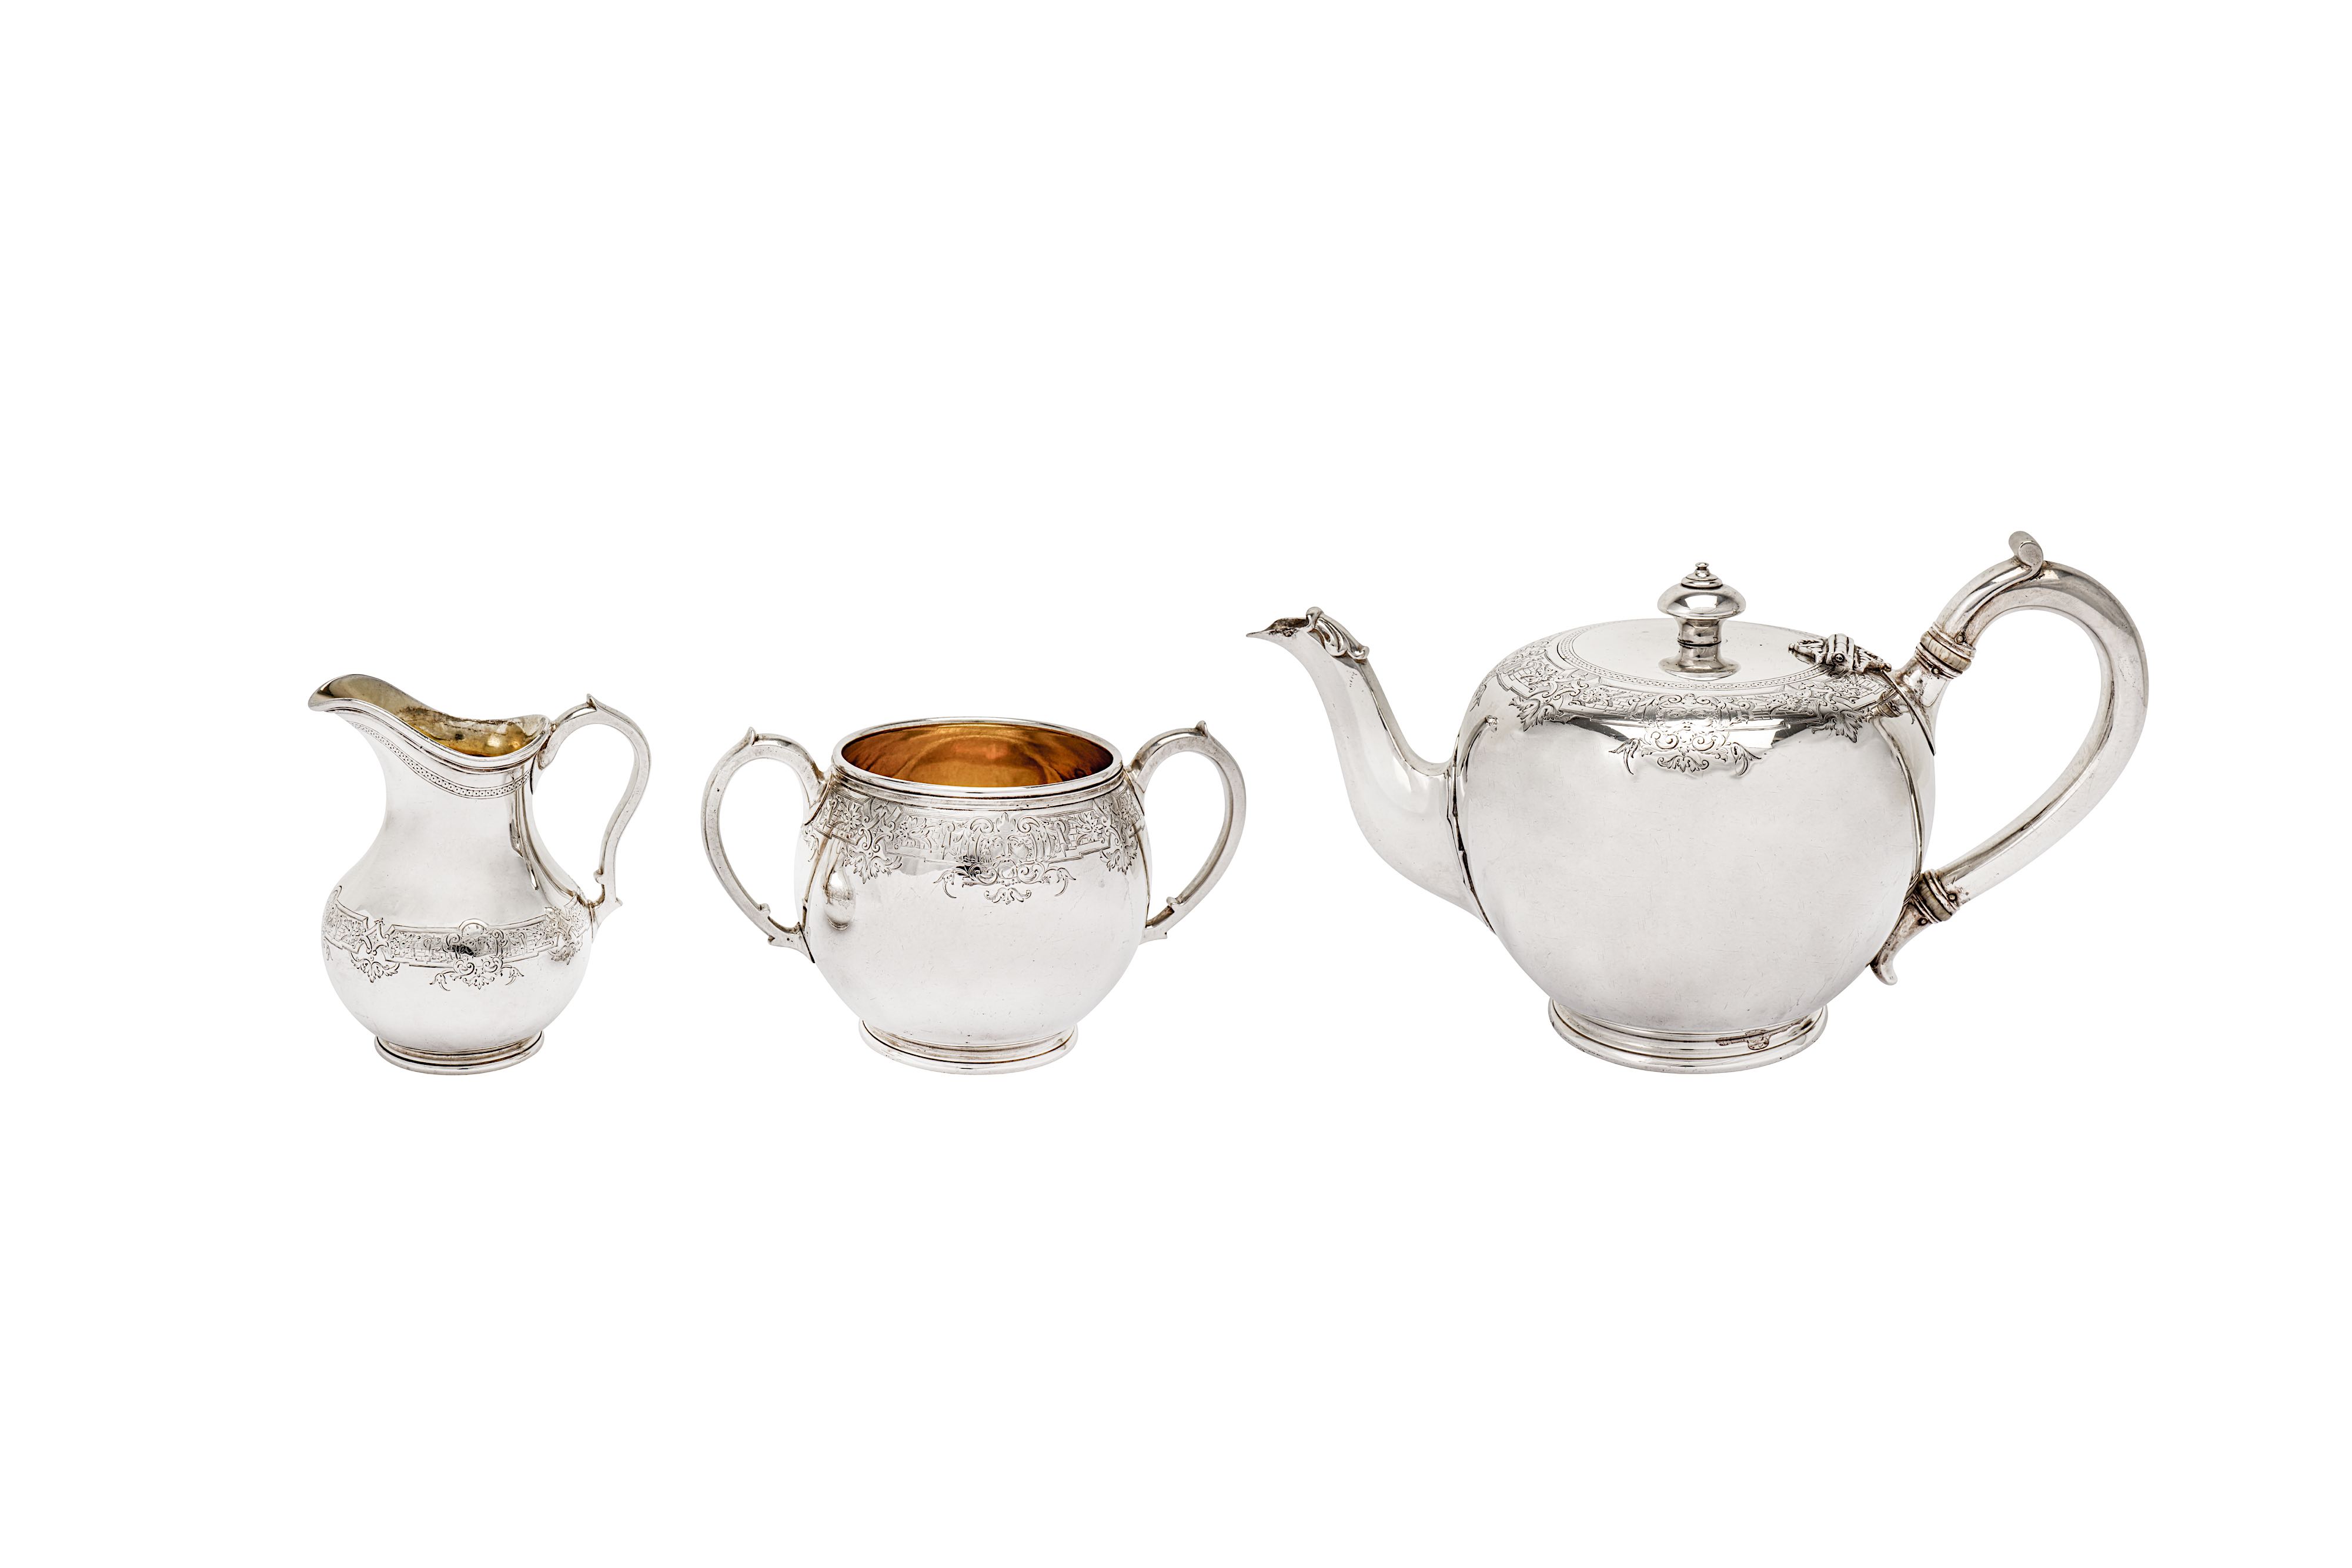 A Victorian sterling silver three-piece tea service, London 1869/70 by John Samuel Hunt and Robert